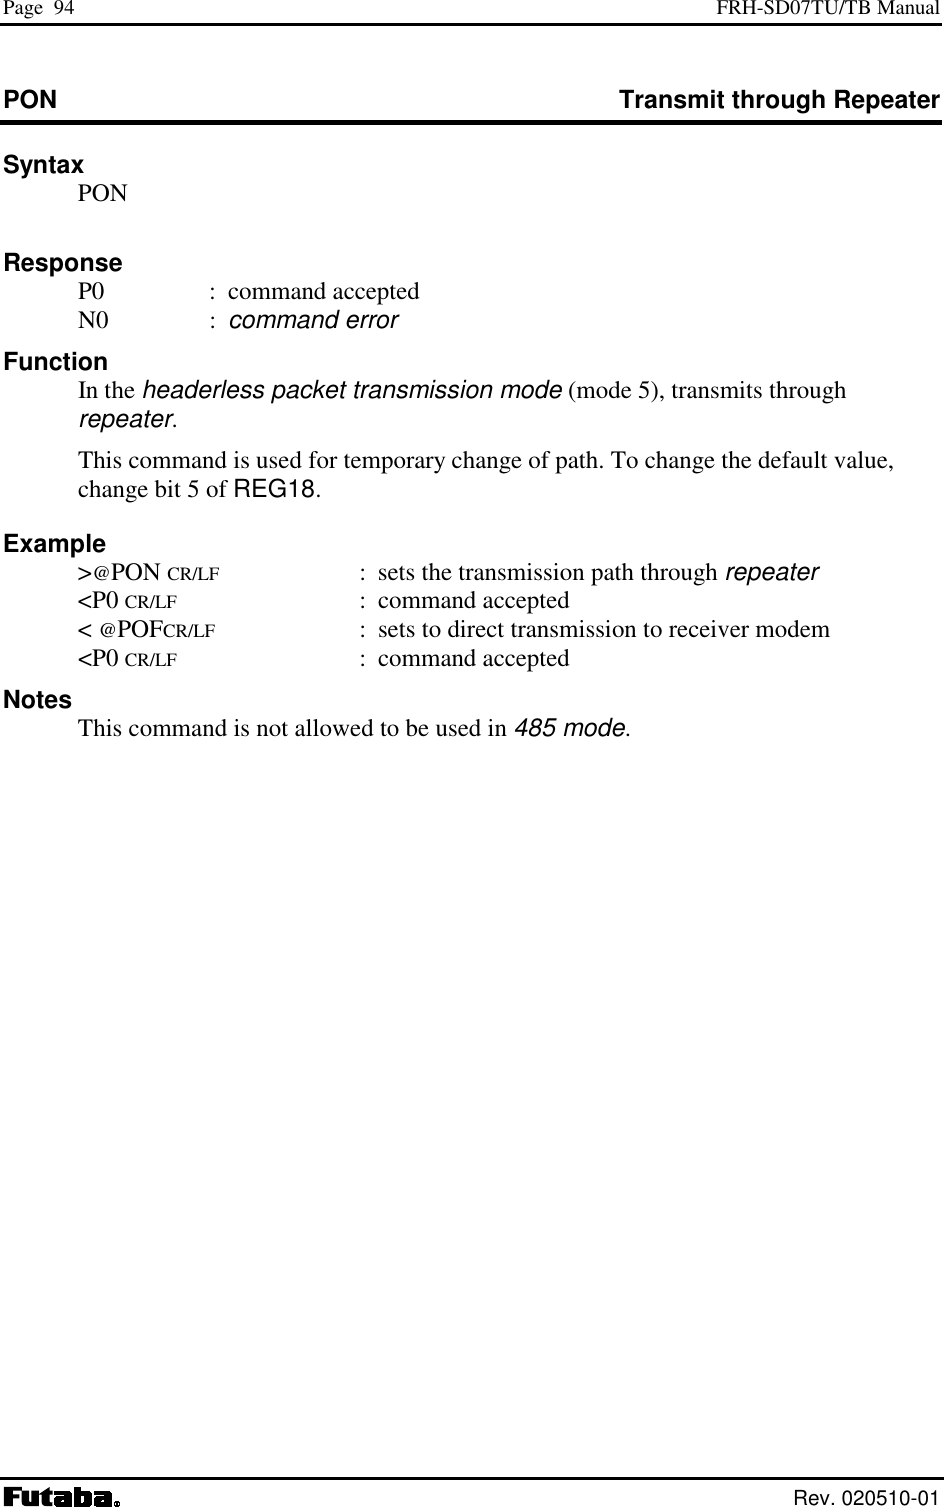 Page  94  FRH-SD07TU/TB Manual  Rev. 020510-01 PON  Transmit through Repeater Syntax  PON      Response  P0  : command accepted  N0  : command error Function  In the headerless packet transmission mode (mode 5), transmits through repeater.   This command is used for temporary change of path. To change the default value, change bit 5 of REG18. Example  &gt;@PON CR/LF  :  sets the transmission path through repeater  &lt;P0 CR/LF : command accepted  &lt; @POFCR/LF  :  sets to direct transmission to receiver modem  &lt;P0 CR/LF : command accepted Notes   This command is not allowed to be used in 485 mode.   